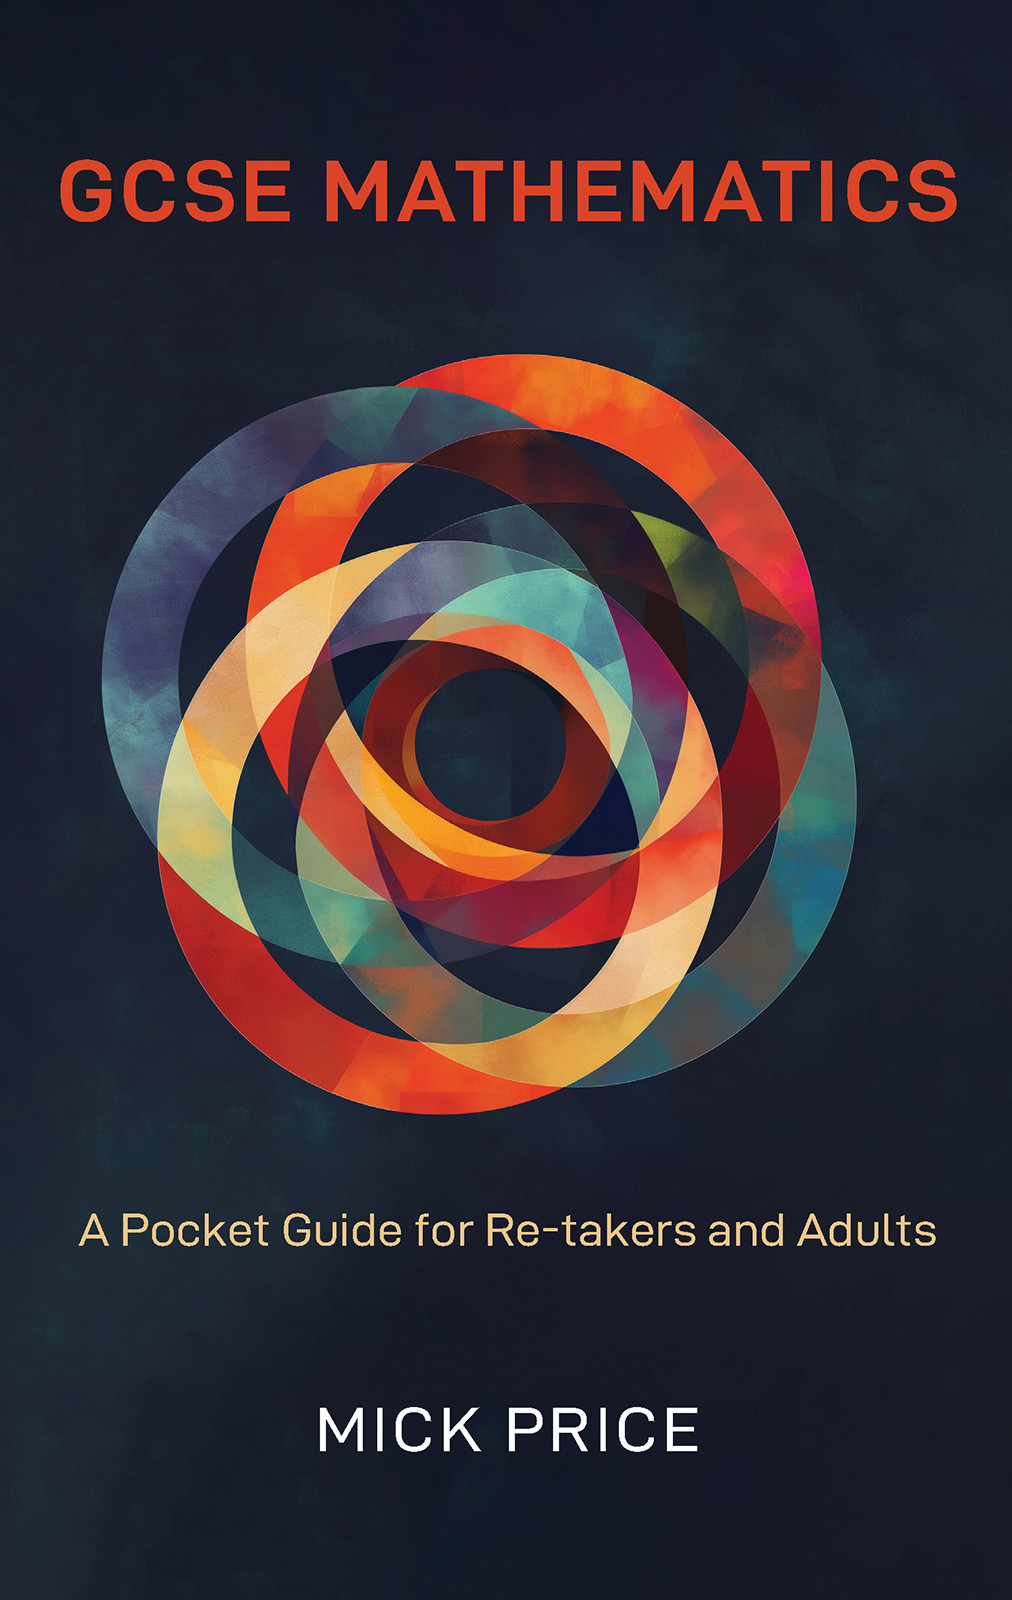 GCSE Mathematics - A Pocket Guide for Re-takers and Adults